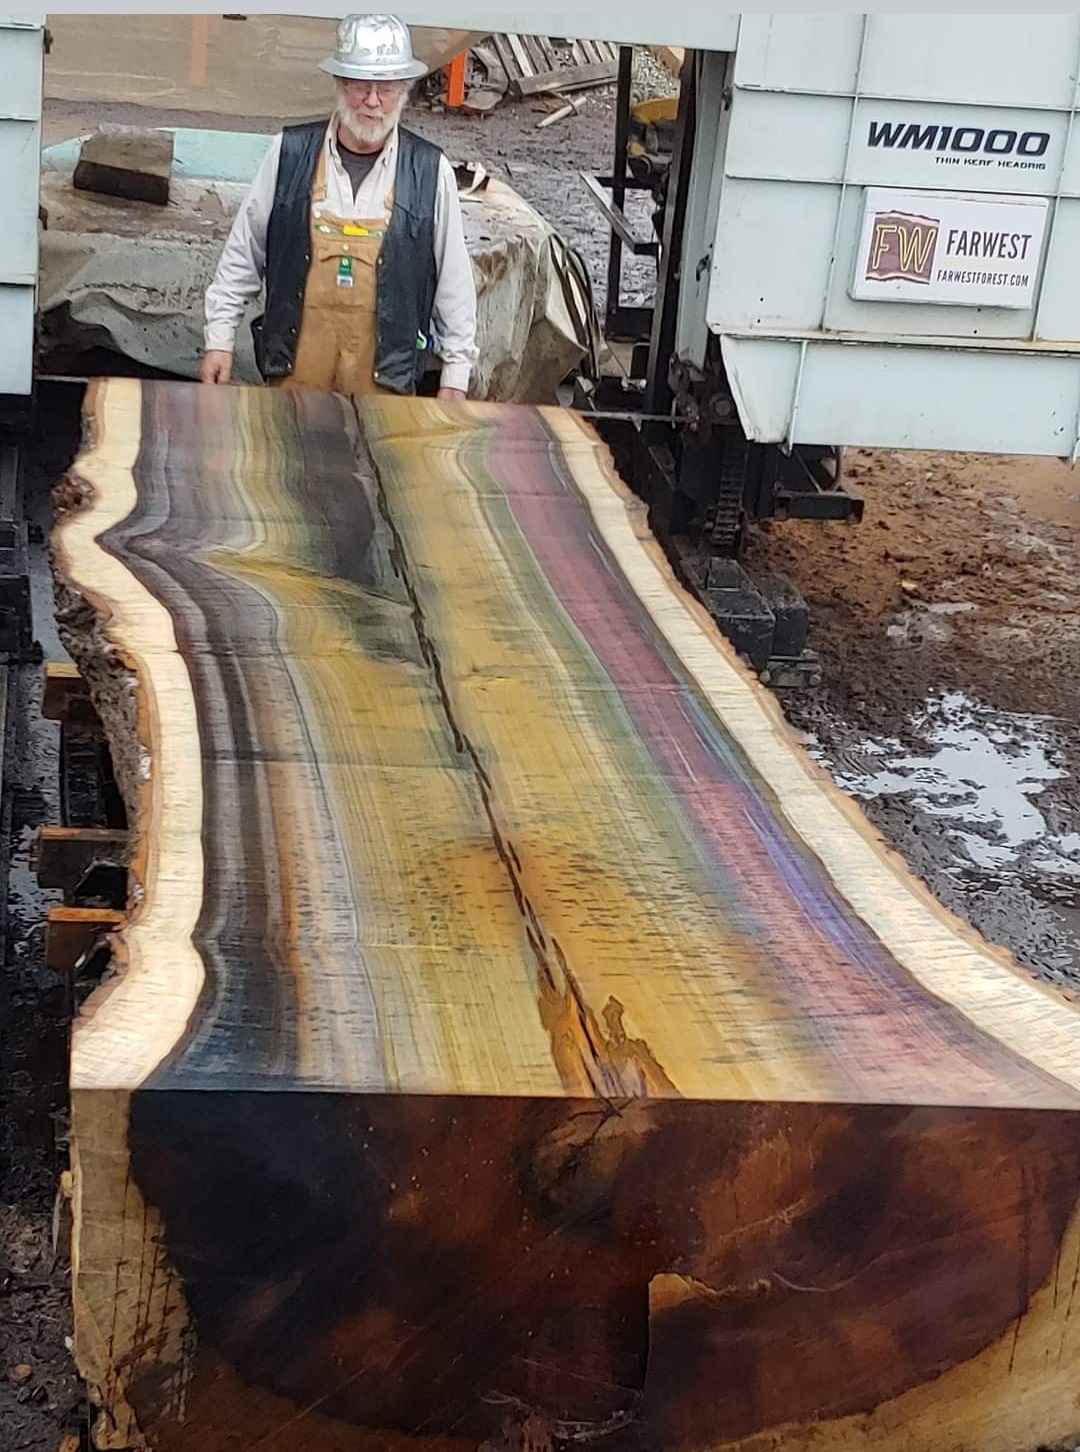 A tulip poplar wood slab with rainbow colors sitting 63" wide on a WM1000 Wood-Mizer sawmill deck with a man in a hardhat standing nearby